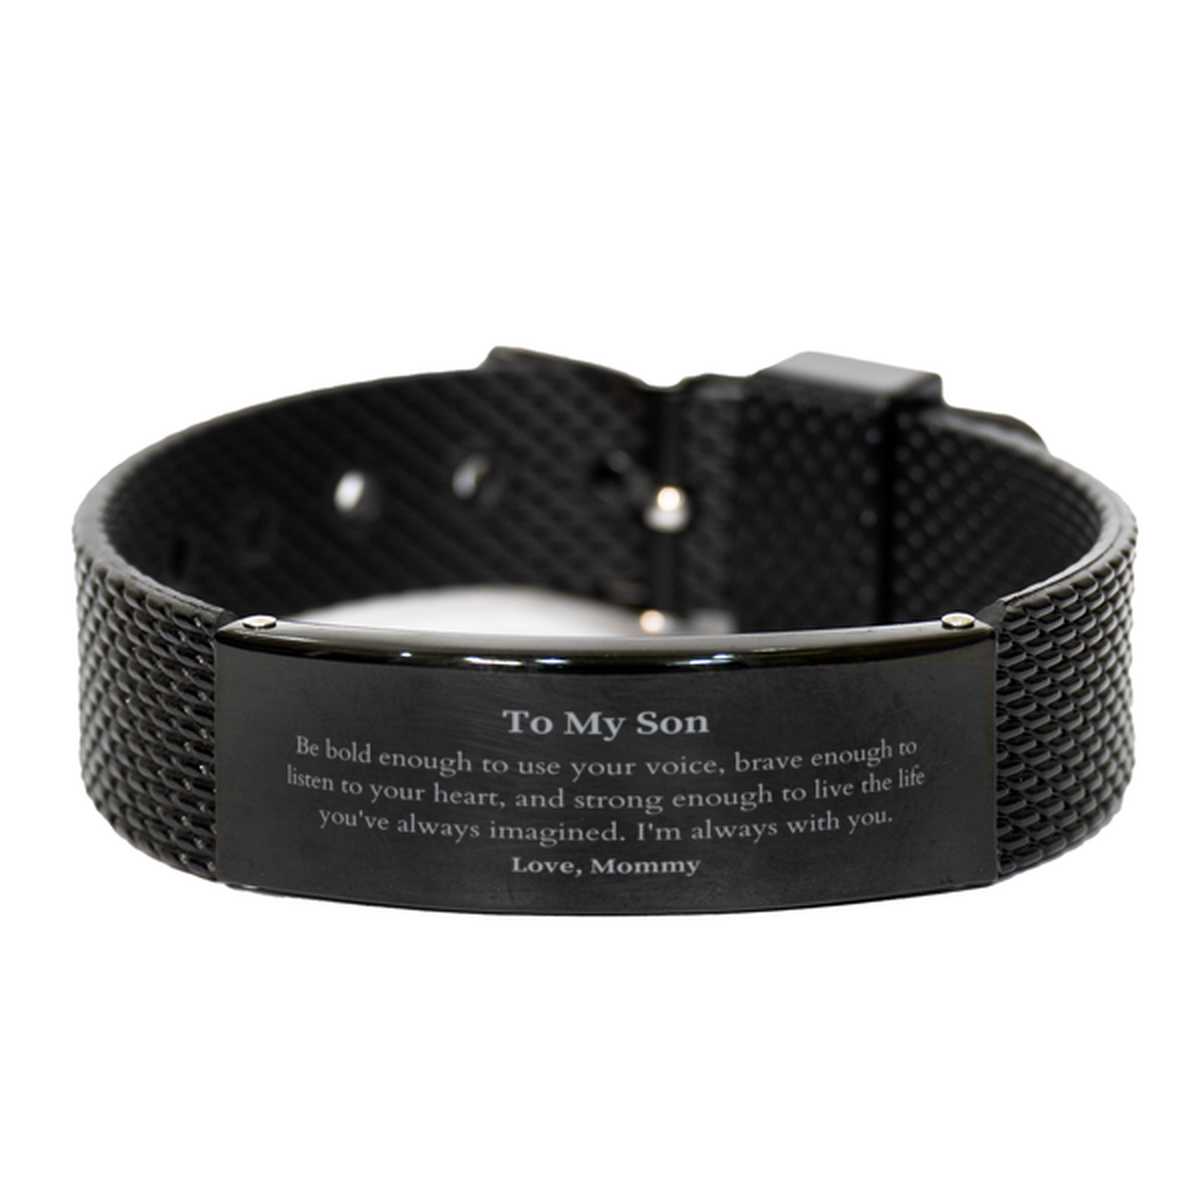 Keepsake Son Black Shark Mesh Bracelet Gift Idea Graduation Christmas Birthday Son from Mommy, Son Be bold enough to use your voice, brave enough to listen to your heart. Love, Mommy